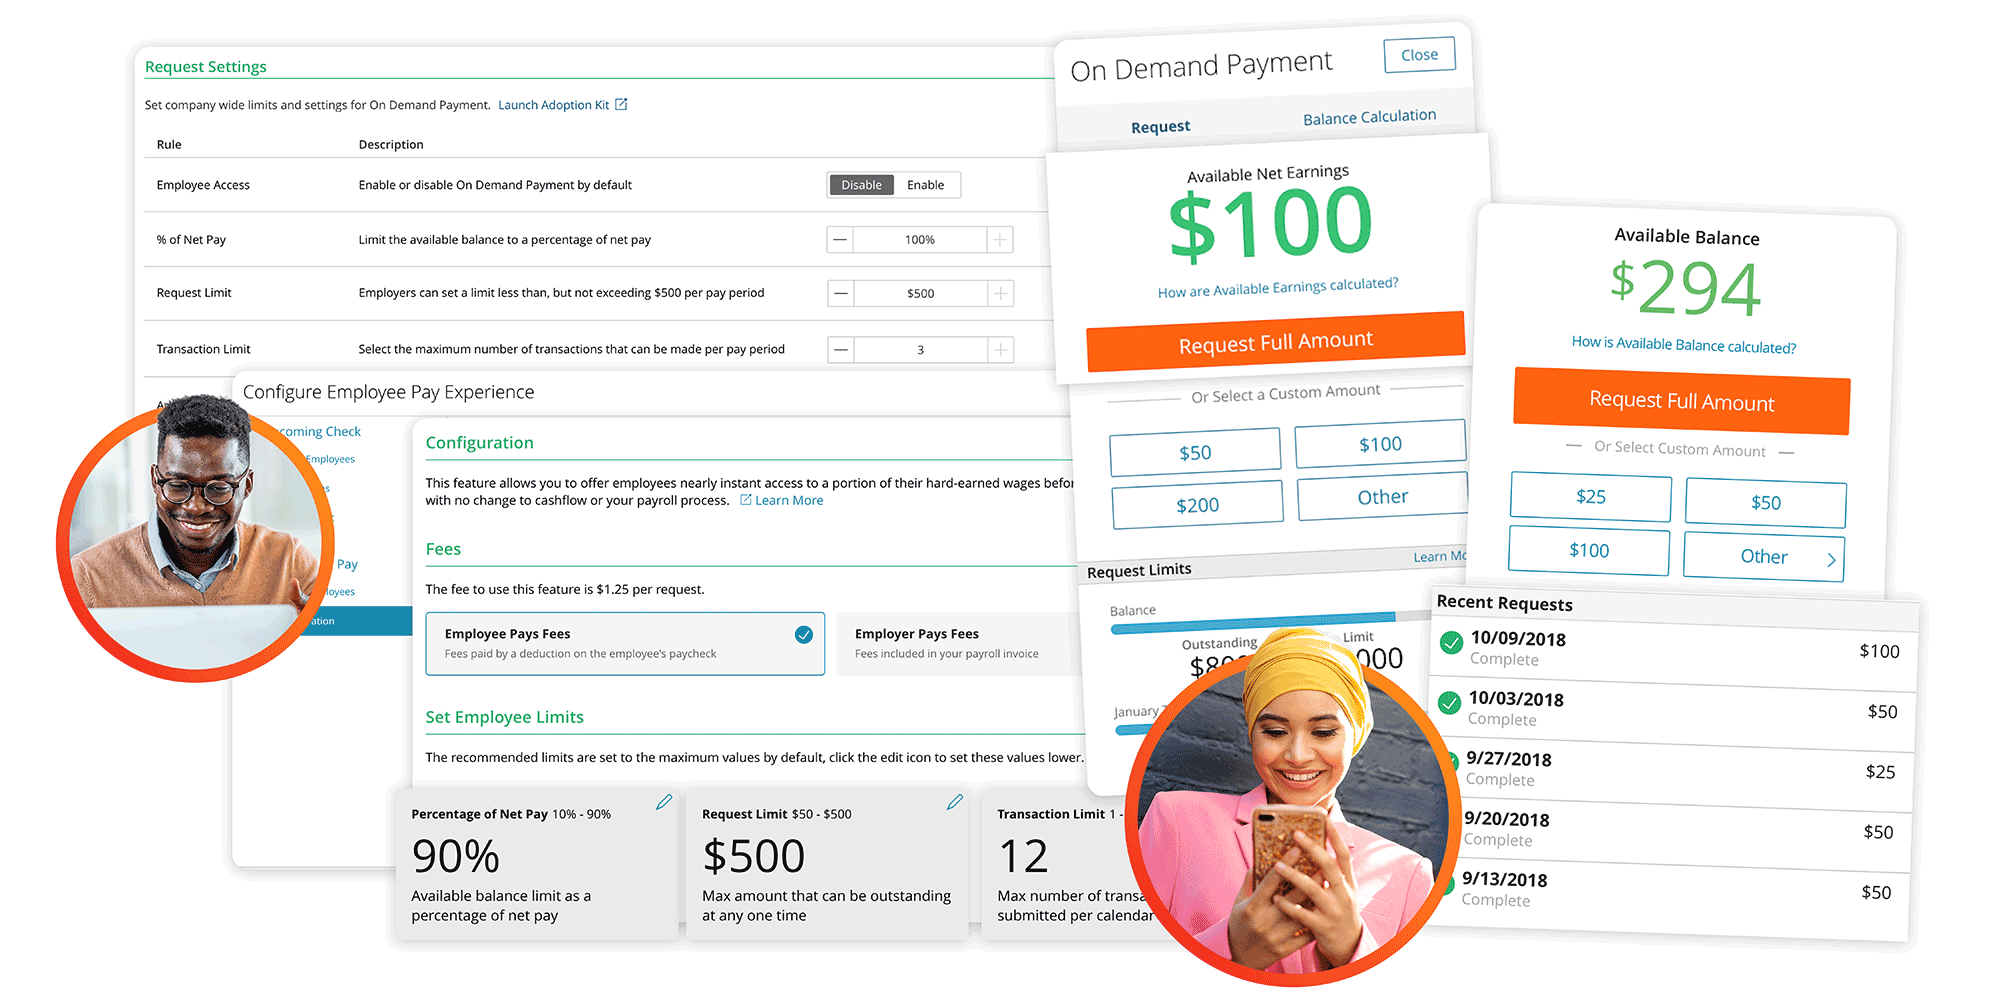 Screenshots of employee and employer view of On Demand Pay functionality